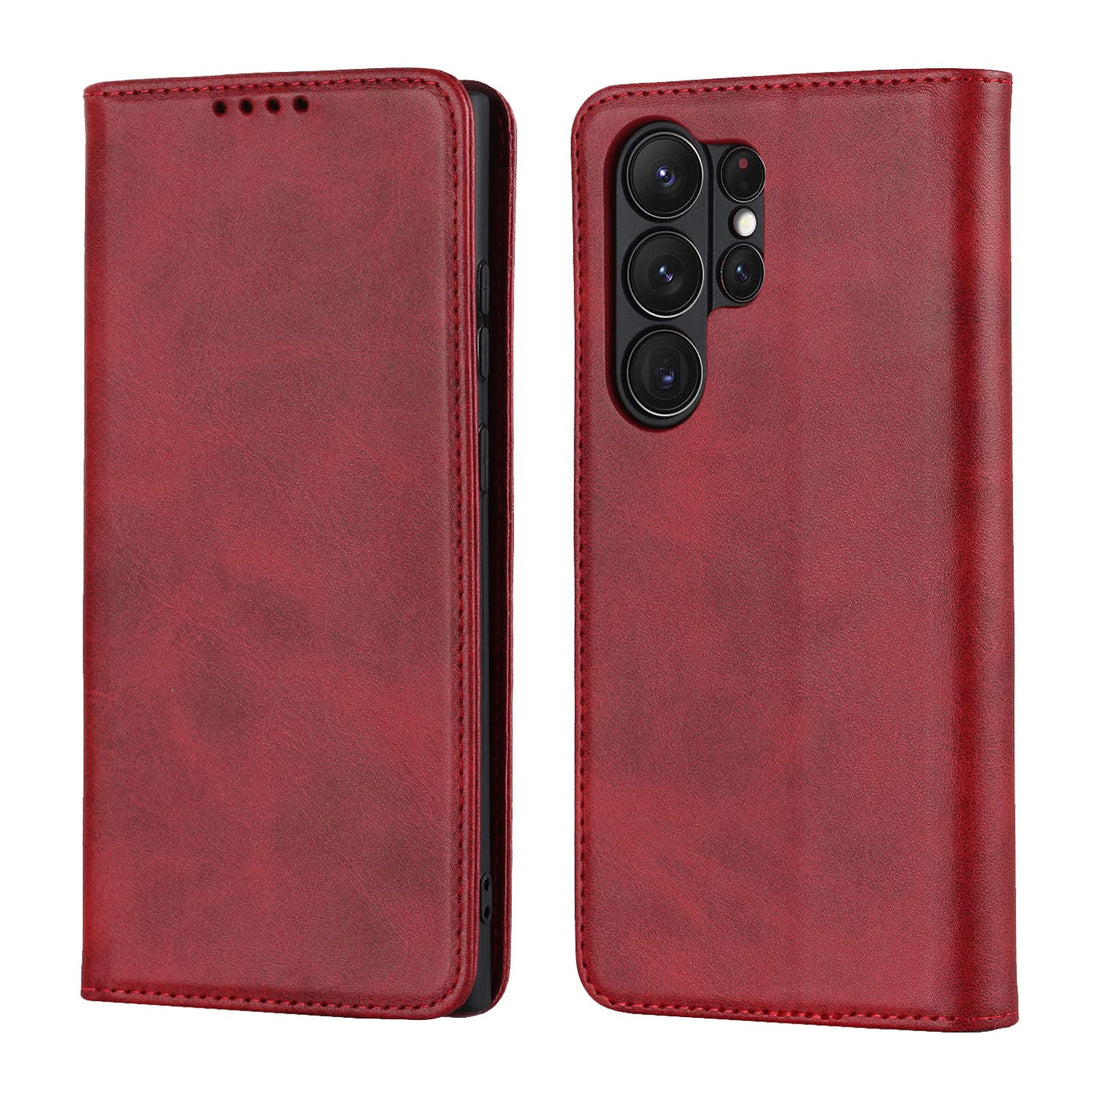 Ｈａｖａｙａ for Samsung Galaxy S23 Ultra Case Wallet with Card Holder,for Samsung S23 Ultra Phone Case for Women,for Galaxy S23 Ultra flip Cell Phone Cover with Credit Card Holders-Red